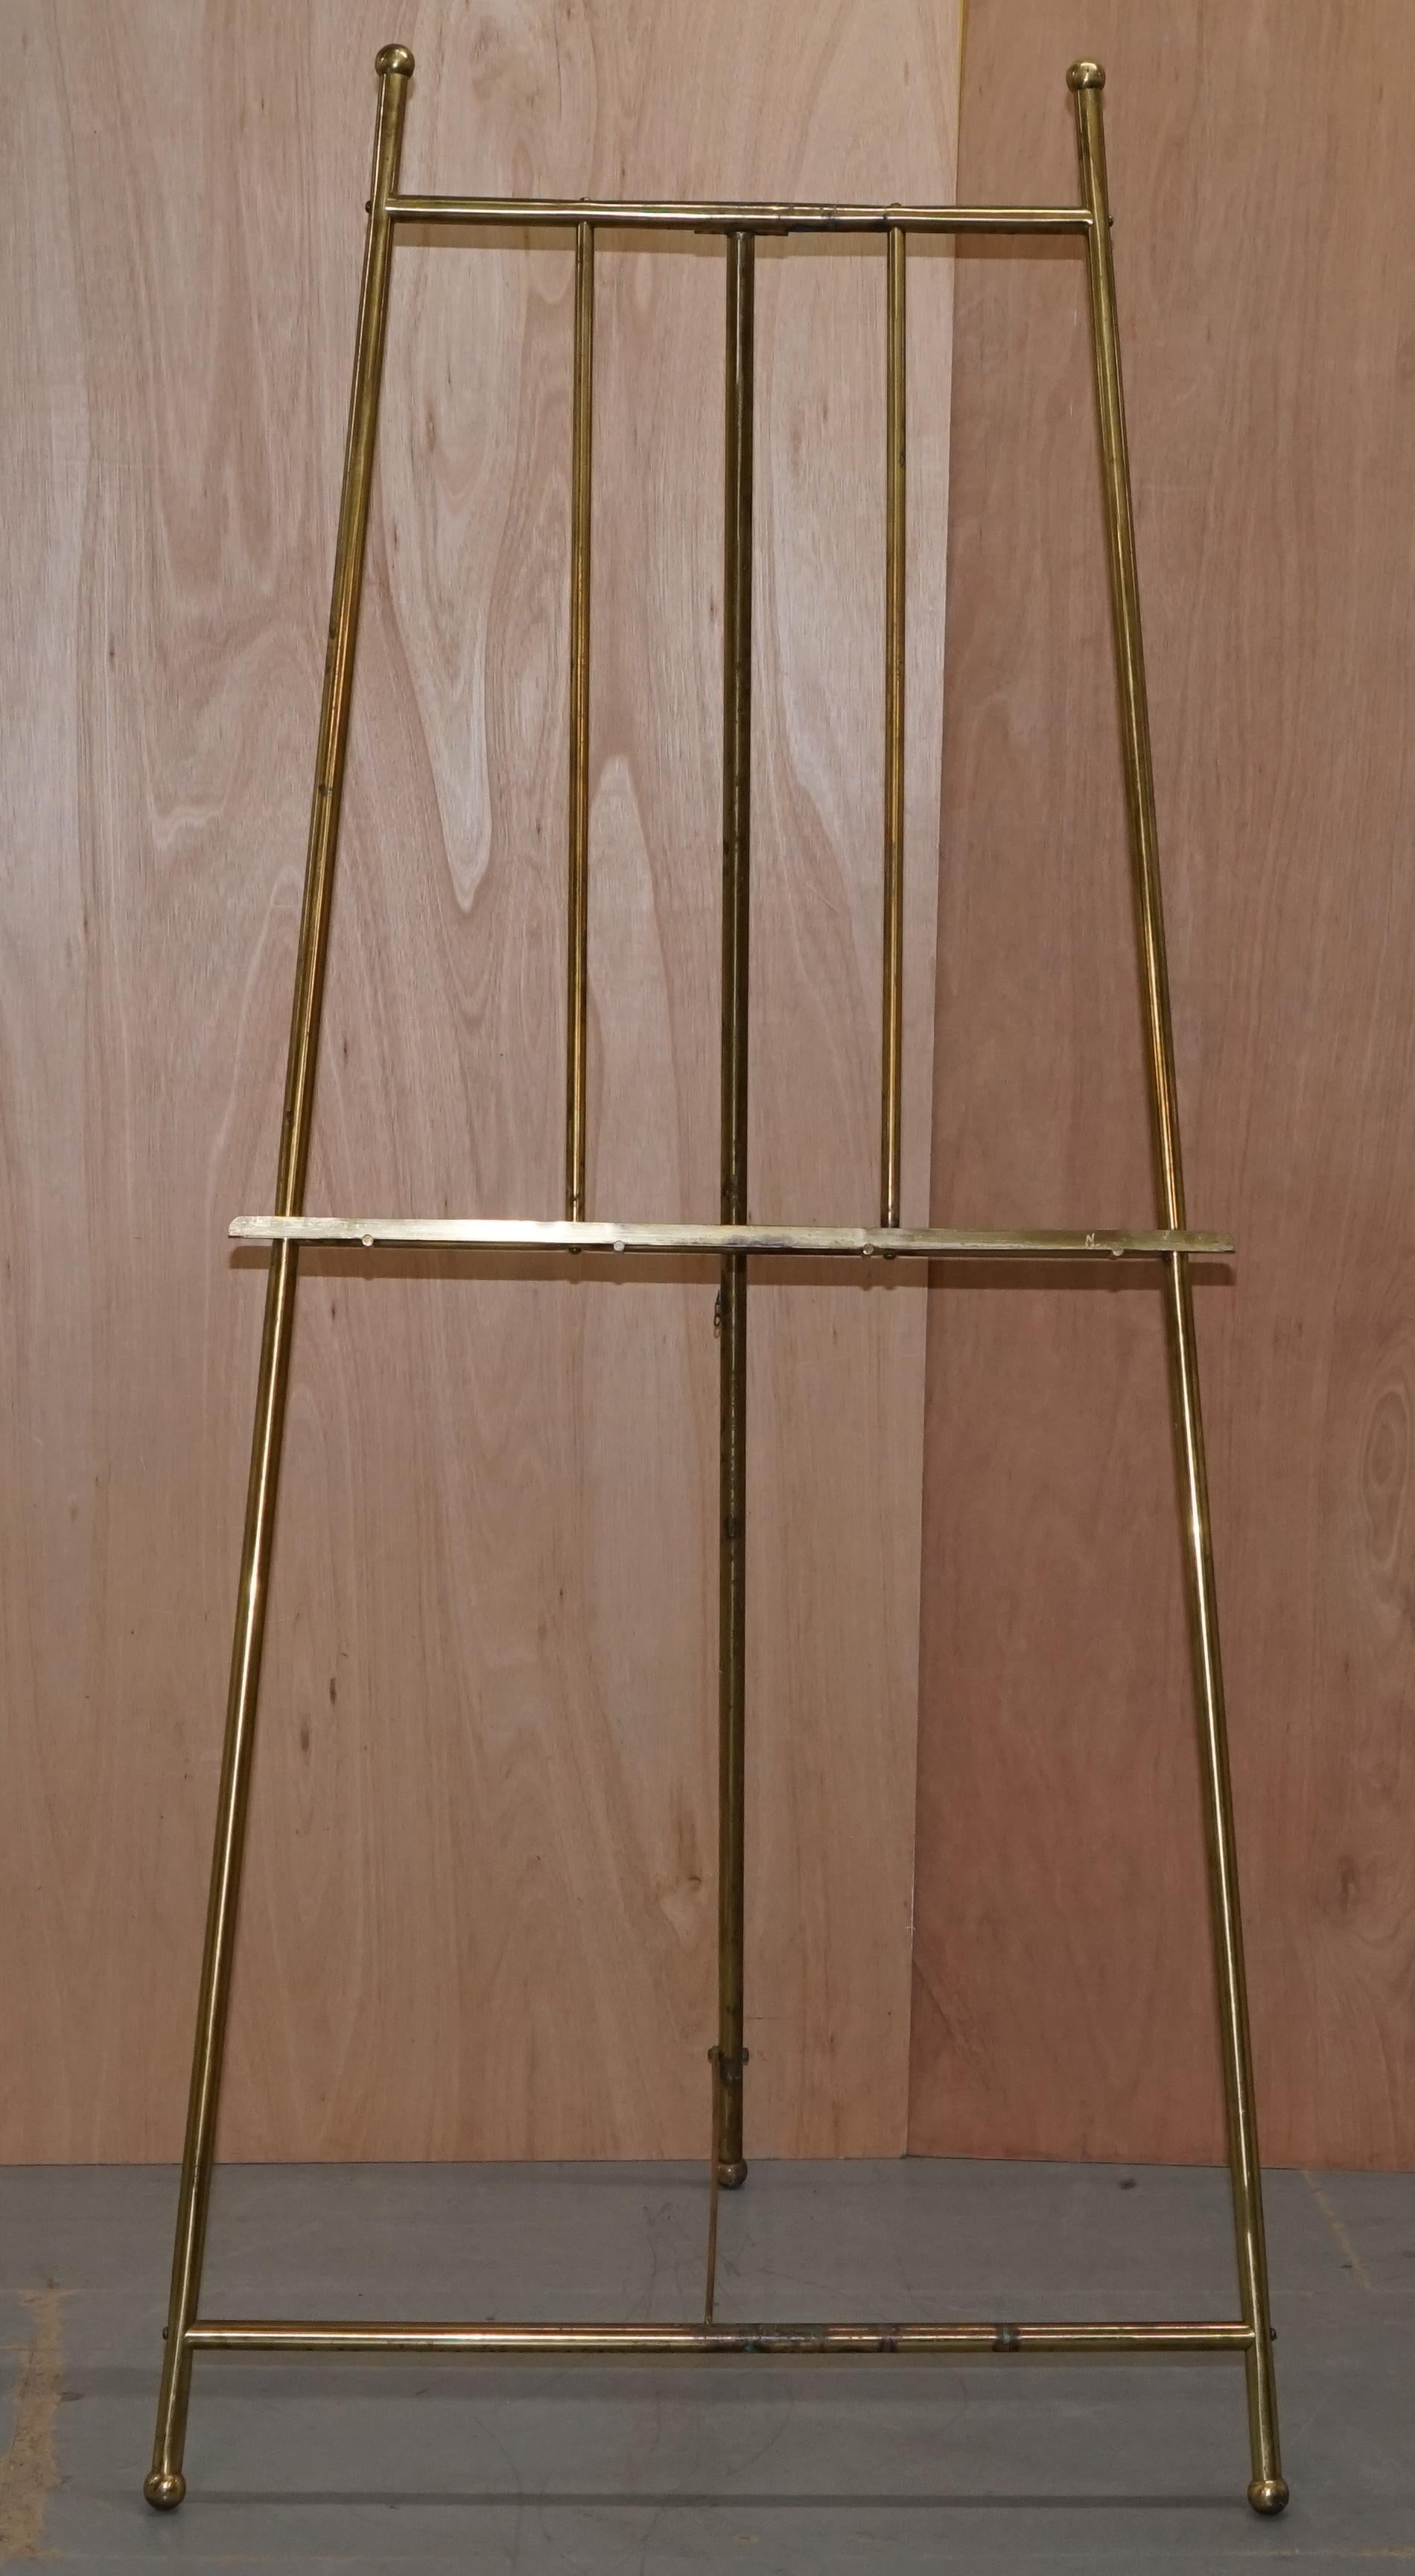 English PAIR OF VINTAGE BRASS LARGE 203CM TALL FOLDING ARTIST EASELs PICTURE DISPLAY